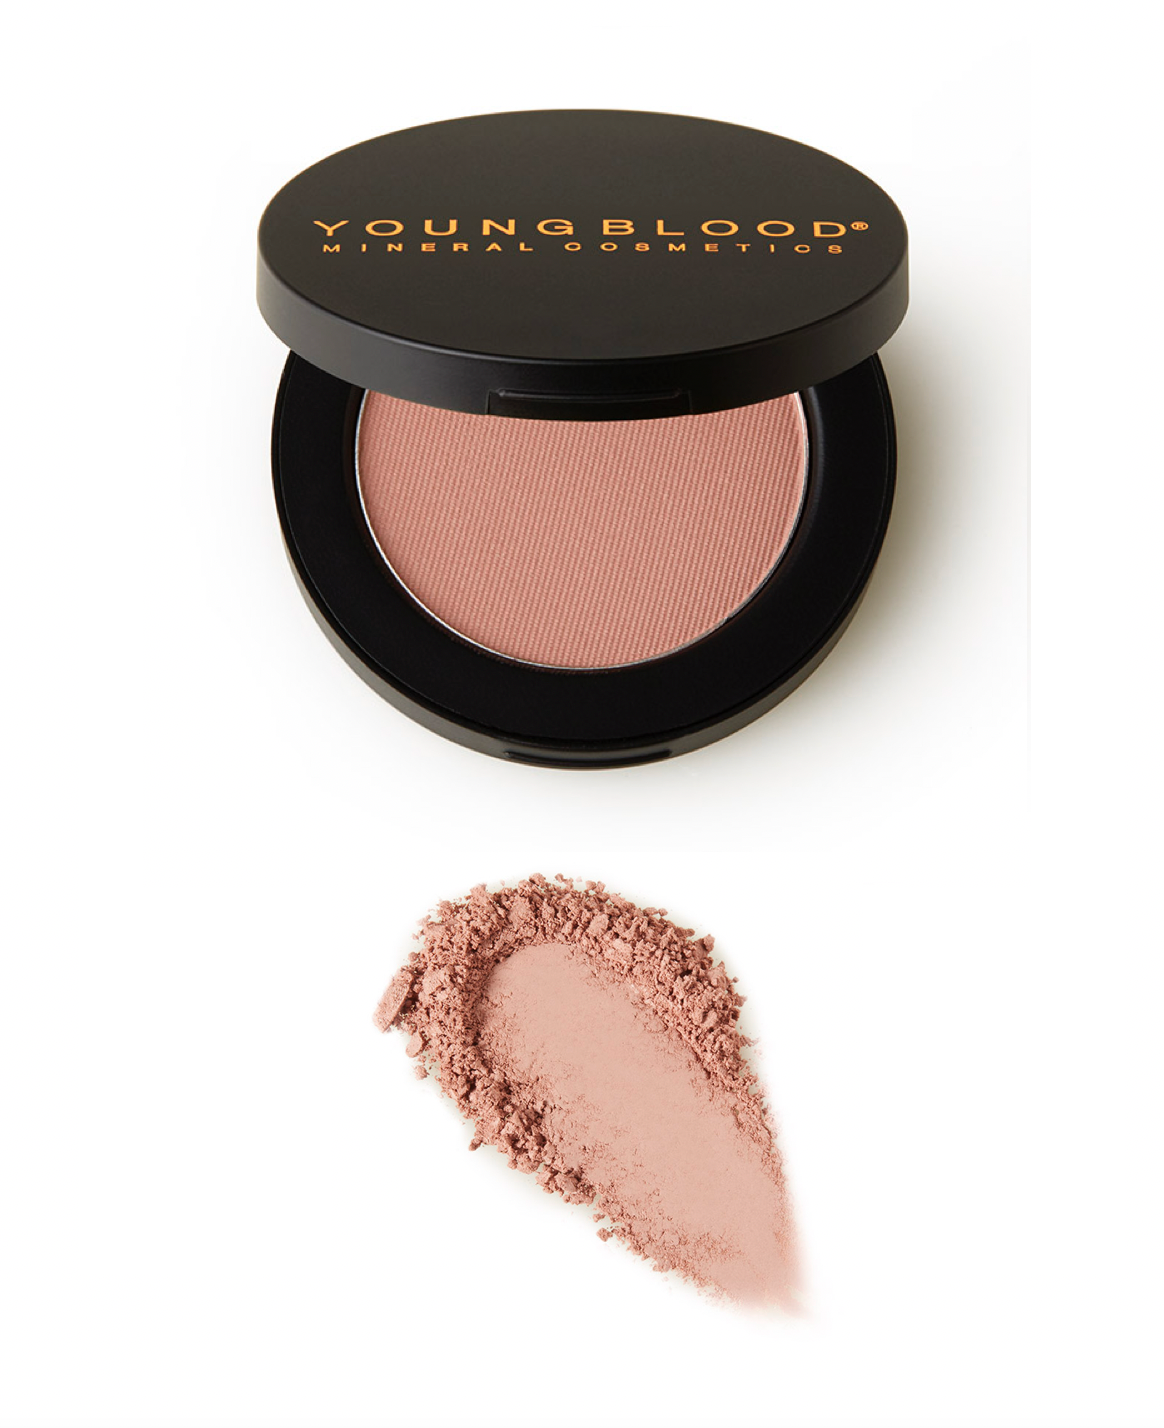 Youngblood Cosmetics Pressed Mineral Blush